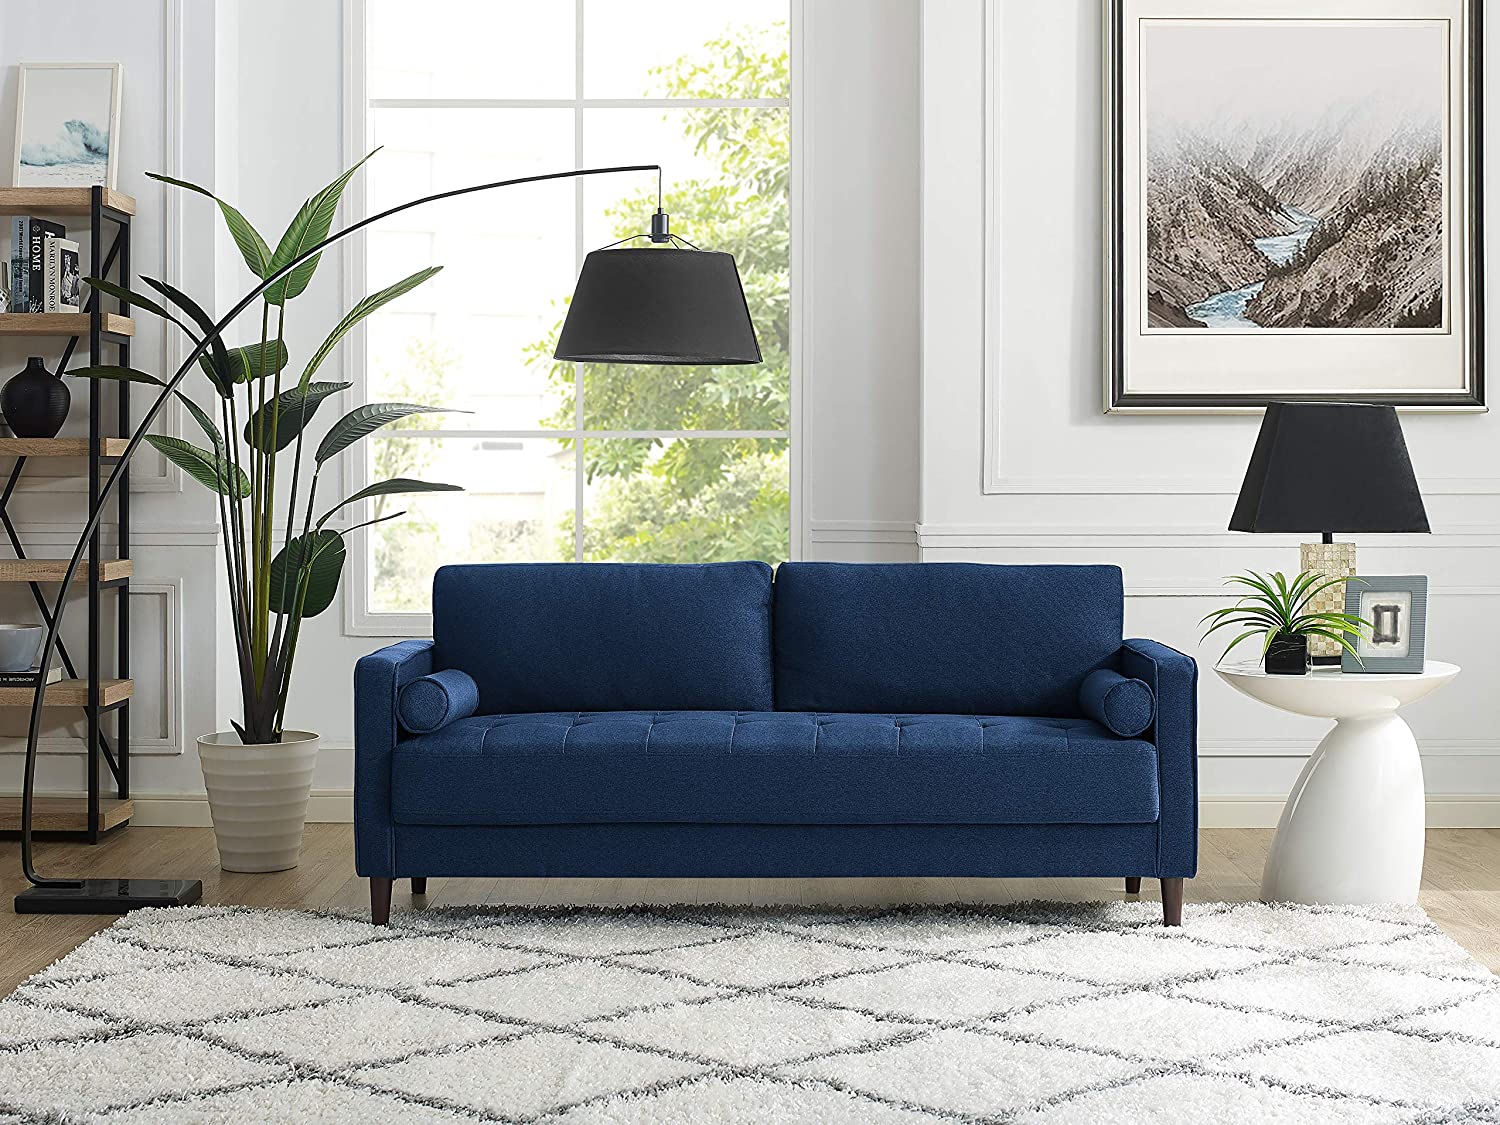 What Color Rug For Blue Couch